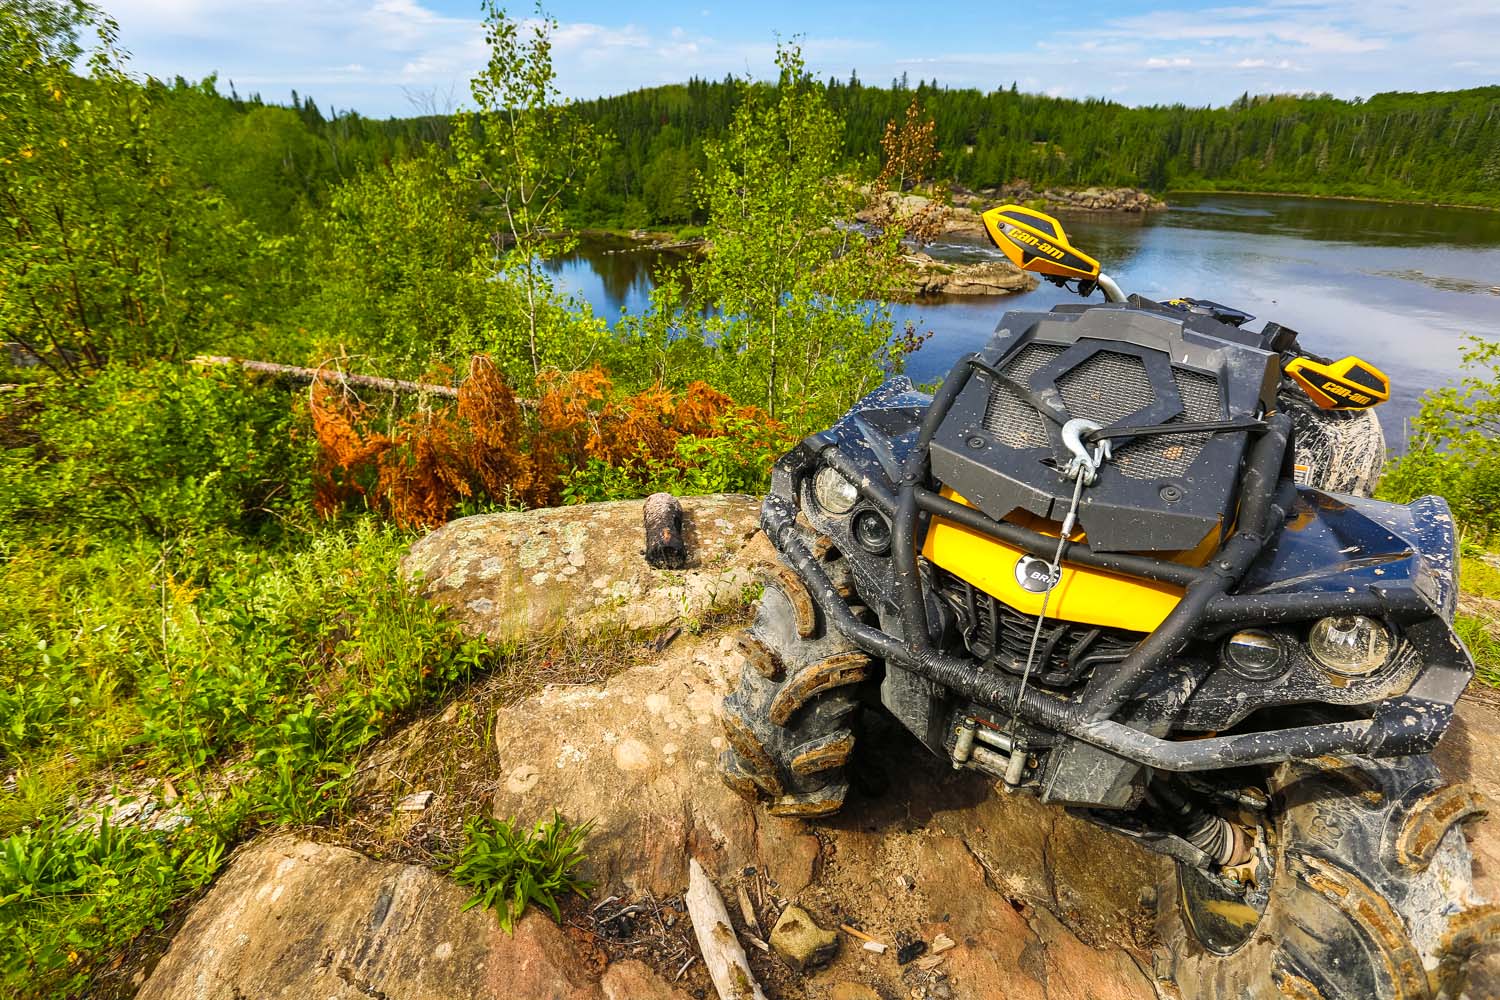 A muddy ATV with a winch on the front parked on an uneven, rocky bank covered in weeds and brush. In the background there is a lake surrounded by green forest.